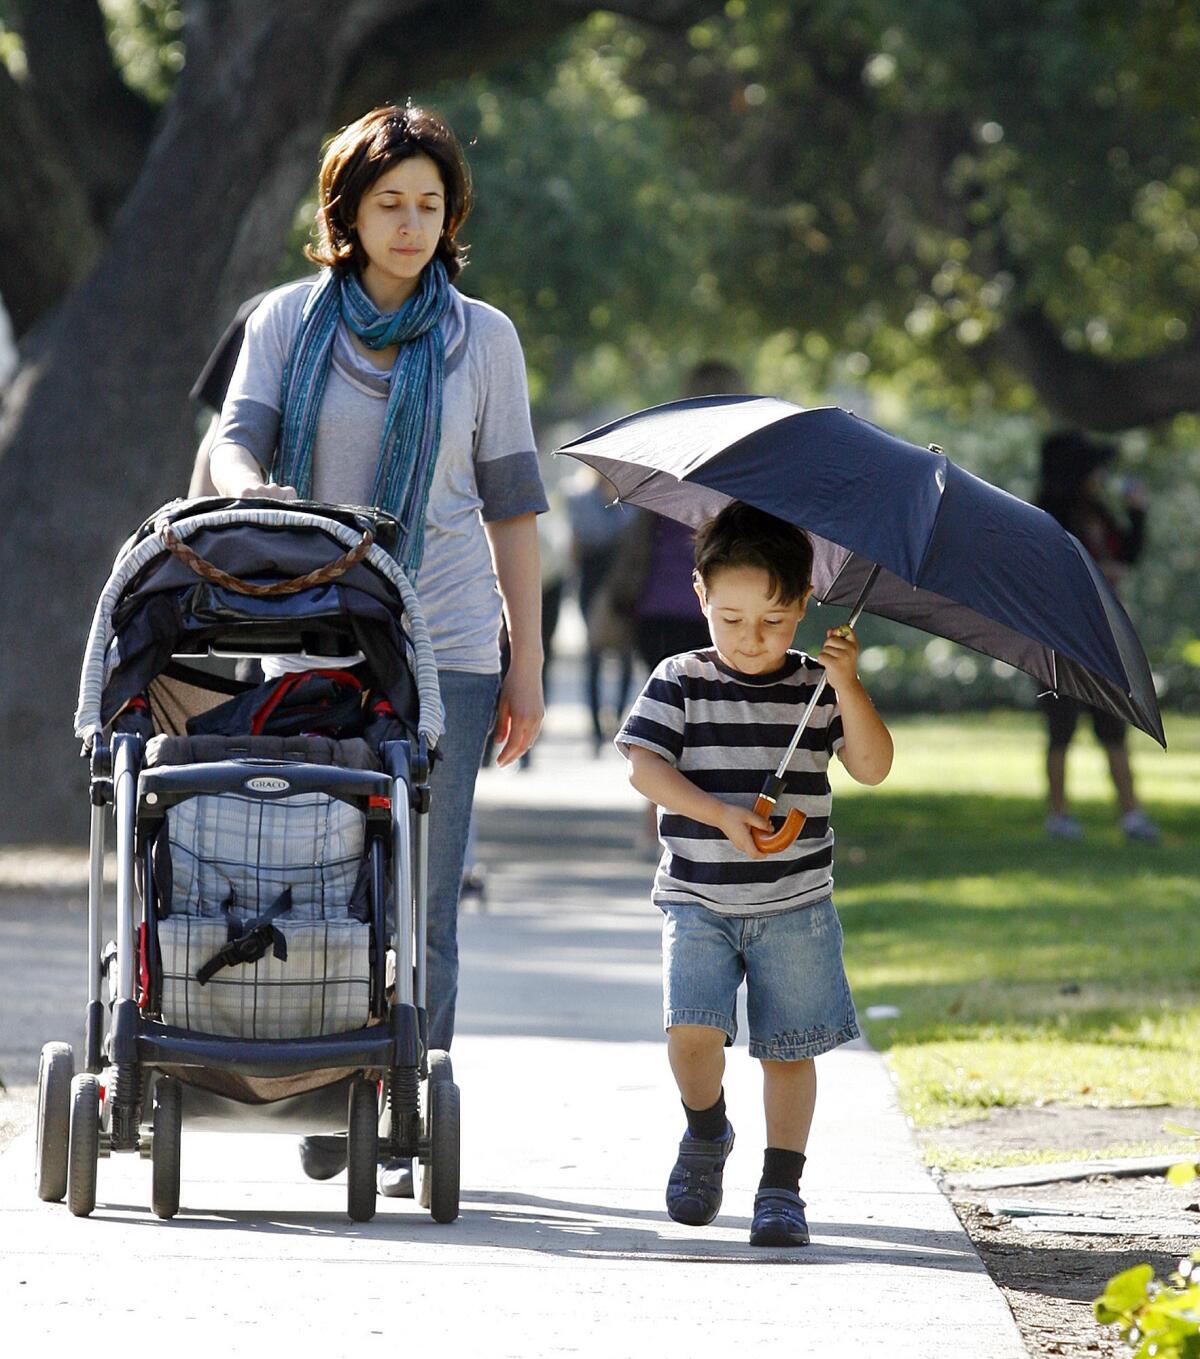 File Photo: Edgar Galstyan, then 3, holds an umbrella, partly to keep from the sun, but more for play, as he walks home with his mom Lusine Tsaturyan after making the morning drop off of a sibling at R.D. White Elementary School in Glendale on May 9, 2012.